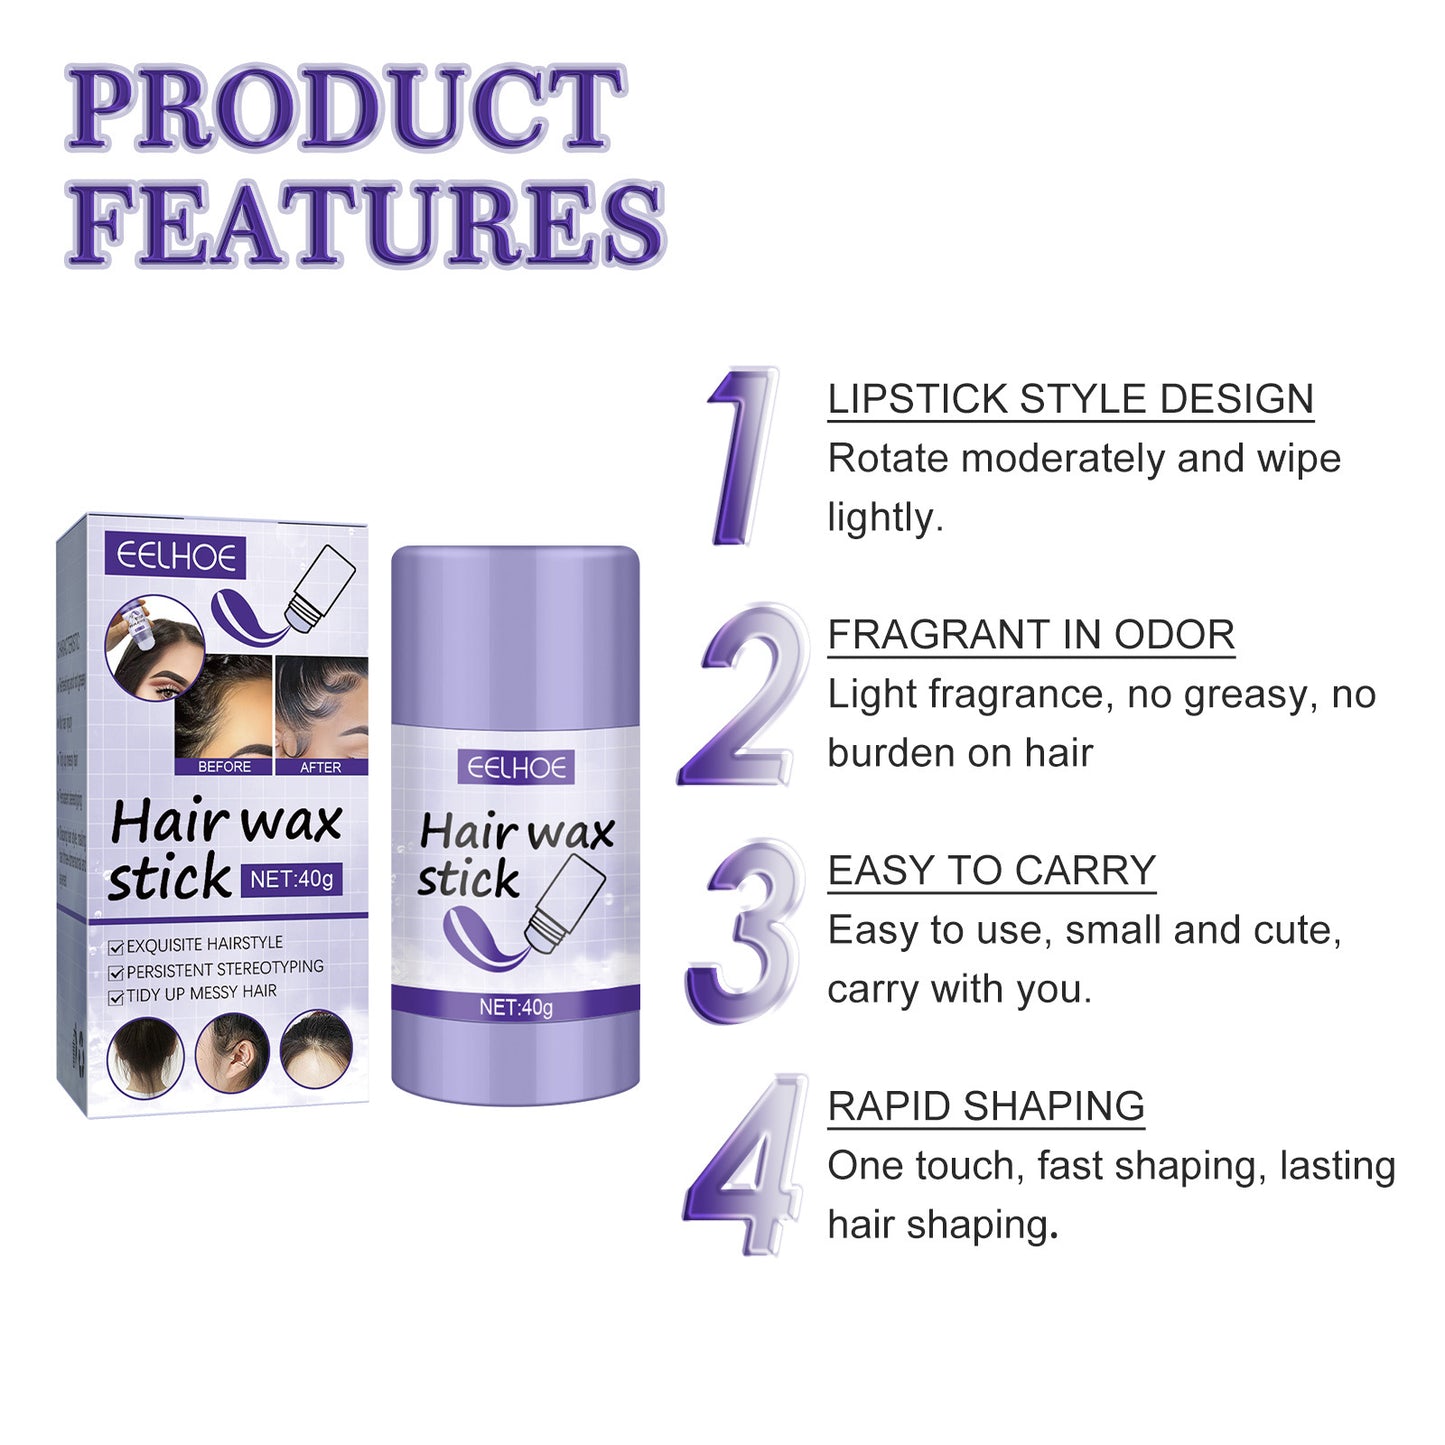 EELHOE Hair Wax Stick for Women Styling Frizz Fixed Fluffy Gel Perfect Line Professional Long Lasting Strong Hair Hold Cream